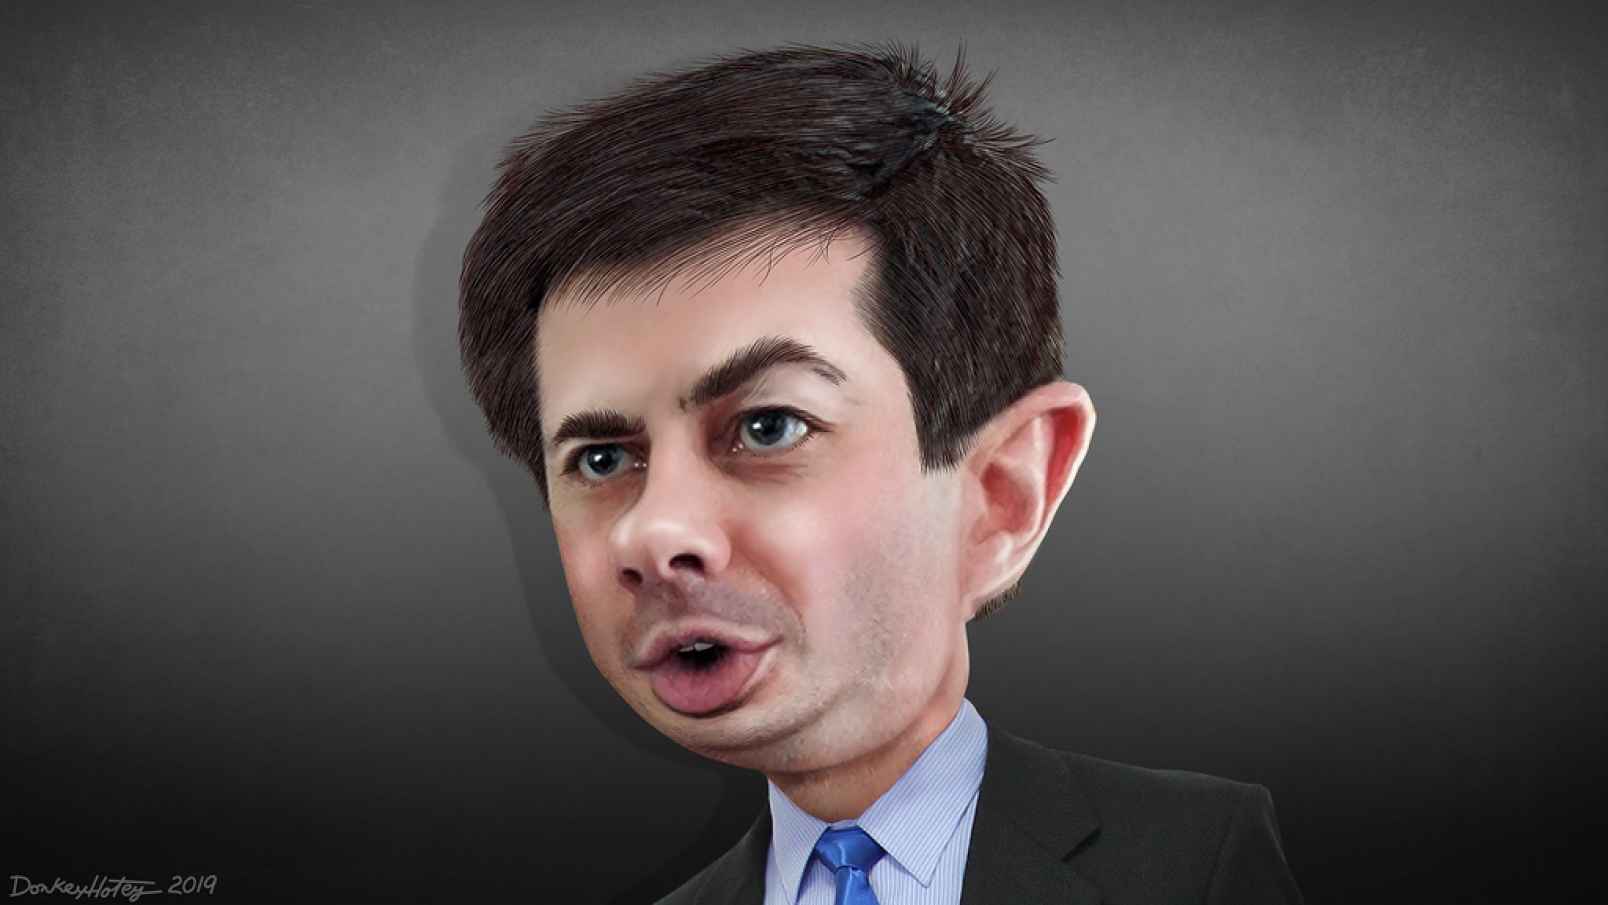 Buttigieg Distorts Scripture To Support His Candidacy – Hires “Faith-Based” Coordinator To Reach “Churches”